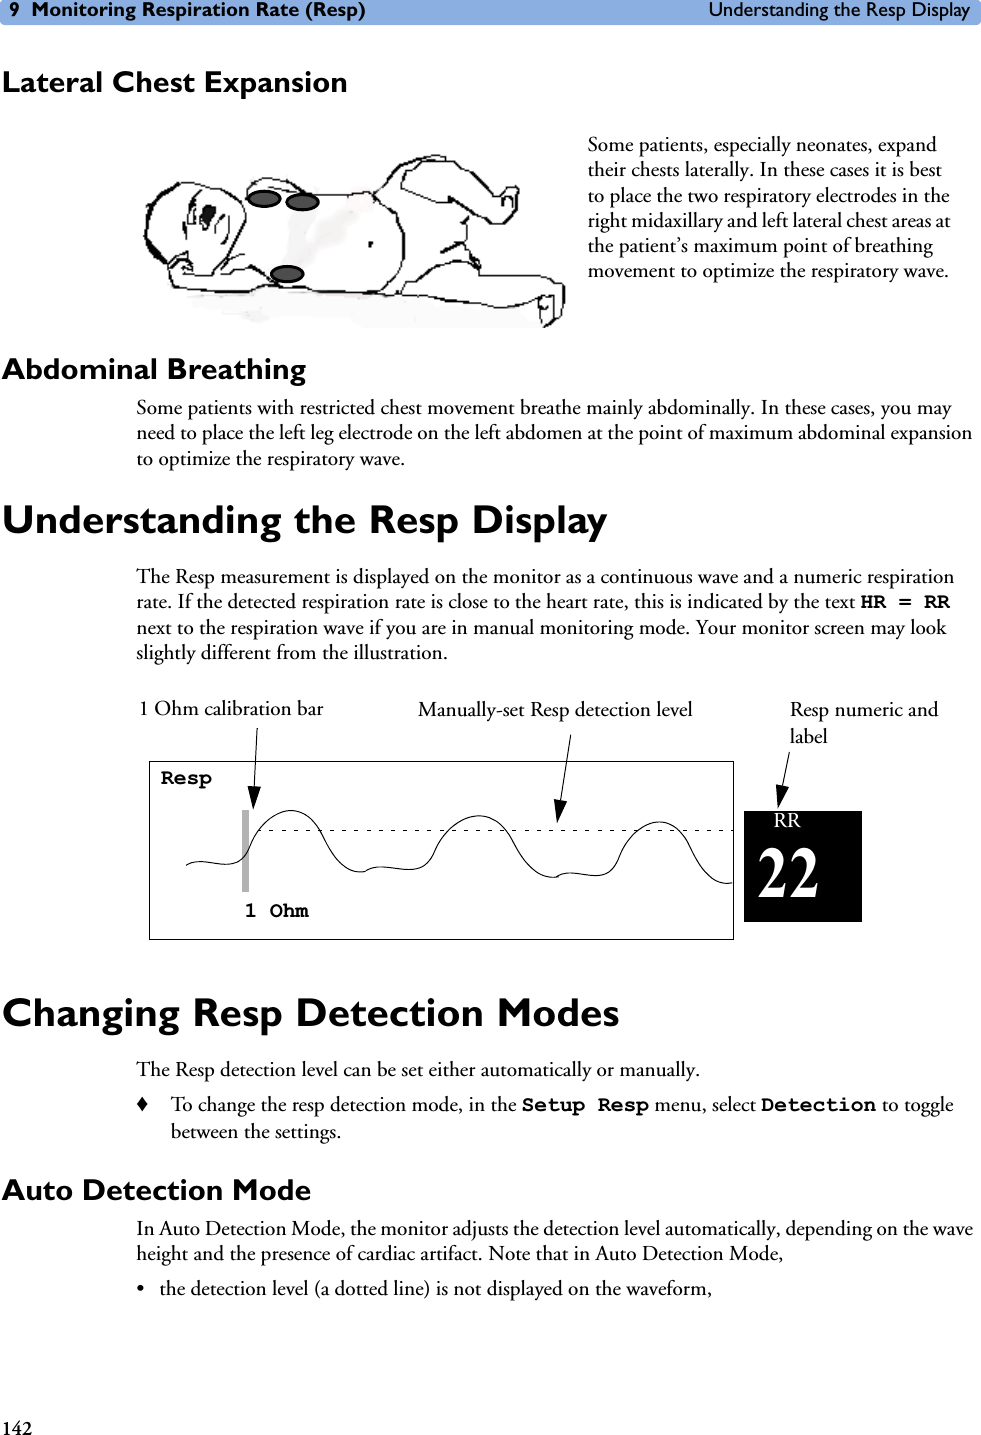 9 Monitoring Respiration Rate (Resp) Understanding the Resp Display142Lateral Chest ExpansionAbdominal BreathingSome patients with restricted chest movement breathe mainly abdominally. In these cases, you may need to place the left leg electrode on the left abdomen at the point of maximum abdominal expansion to optimize the respiratory wave.Understanding the Resp DisplayThe Resp measurement is displayed on the monitor as a continuous wave and a numeric respiration rate. If the detected respiration rate is close to the heart rate, this is indicated by the text HR = RR next to the respiration wave if you are in manual monitoring mode. Your monitor screen may look slightly different from the illustration.Changing Resp Detection ModesThe Resp detection level can be set either automatically or manually. ♦To change the resp detection mode, in the Setup Resp menu, select Detection to toggle between the settings. Auto Detection ModeIn Auto Detection Mode, the monitor adjusts the detection level automatically, depending on the wave height and the presence of cardiac artifact. Note that in Auto Detection Mode, • the detection level (a dotted line) is not displayed on the waveform,Some patients, especially neonates, expand their chests laterally. In these cases it is best to place the two respiratory electrodes in the right midaxillary and left lateral chest areas at the patient’s maximum point of breathing movement to optimize the respiratory wave. Resp1 Ohm22RRManually-set Resp detection level1 Ohm calibration bar Resp numeric and label